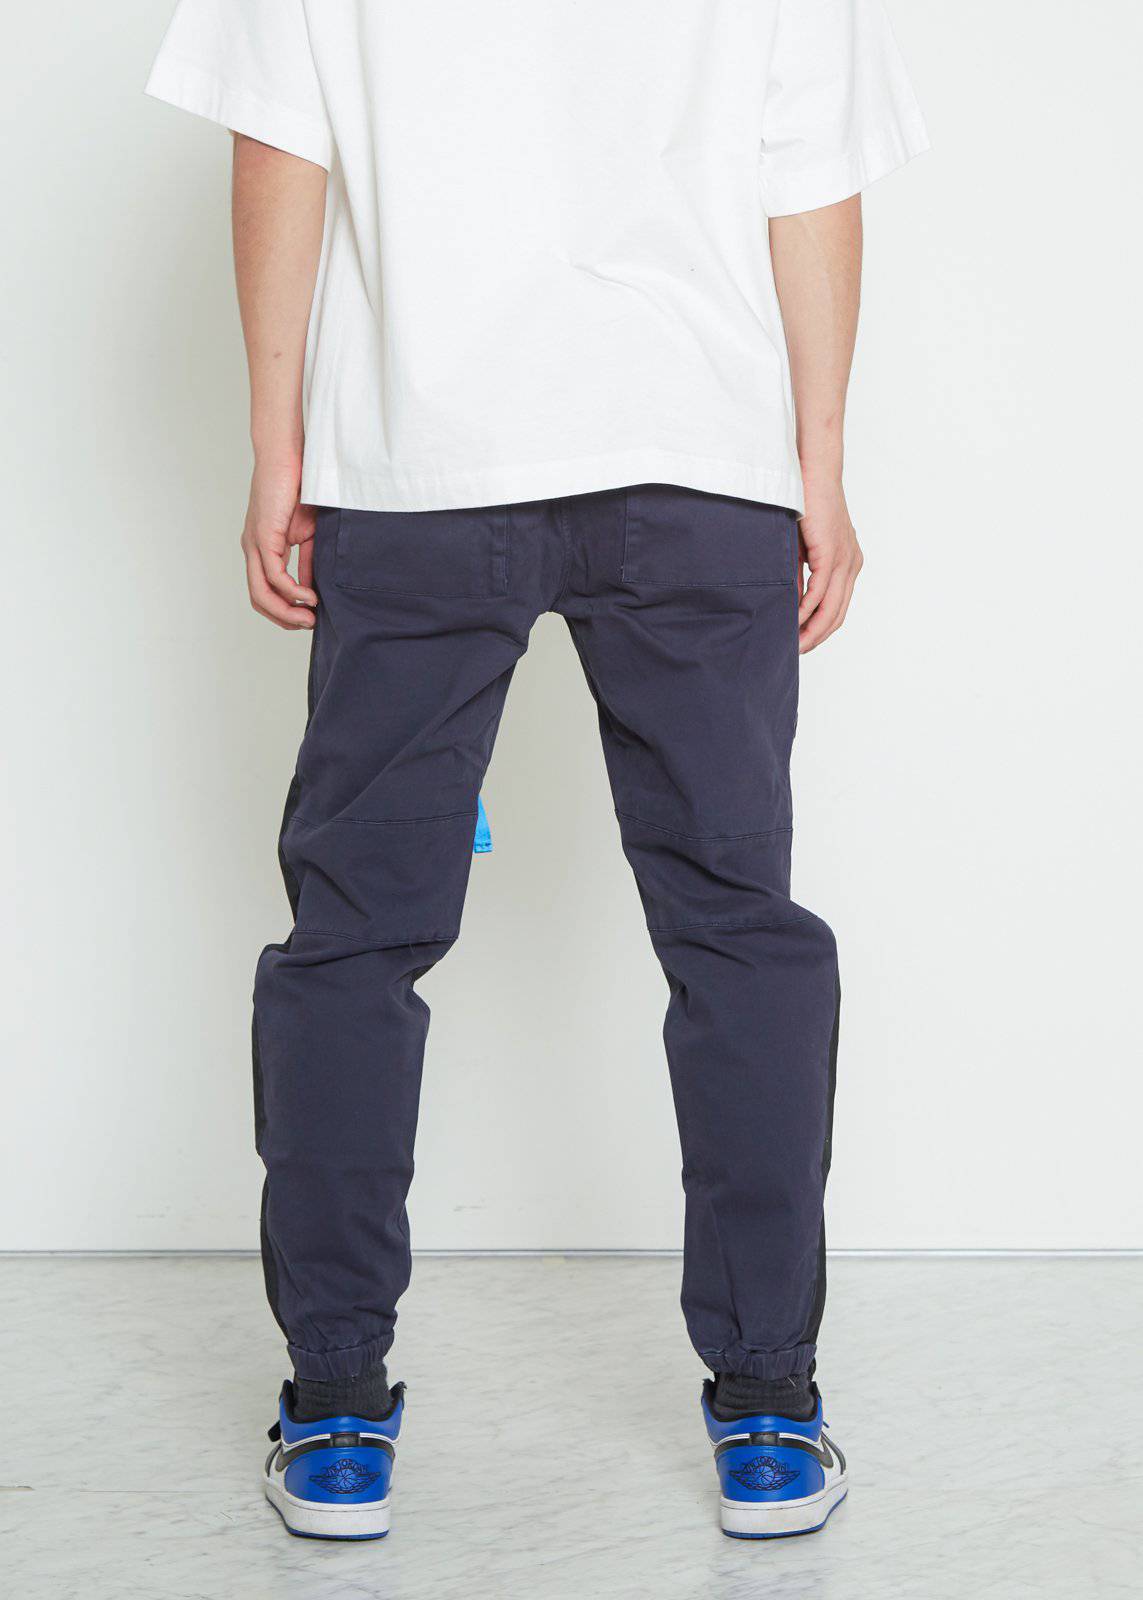 Konus Men's Woven Jogger with Tape in Navy by Shop at Konus